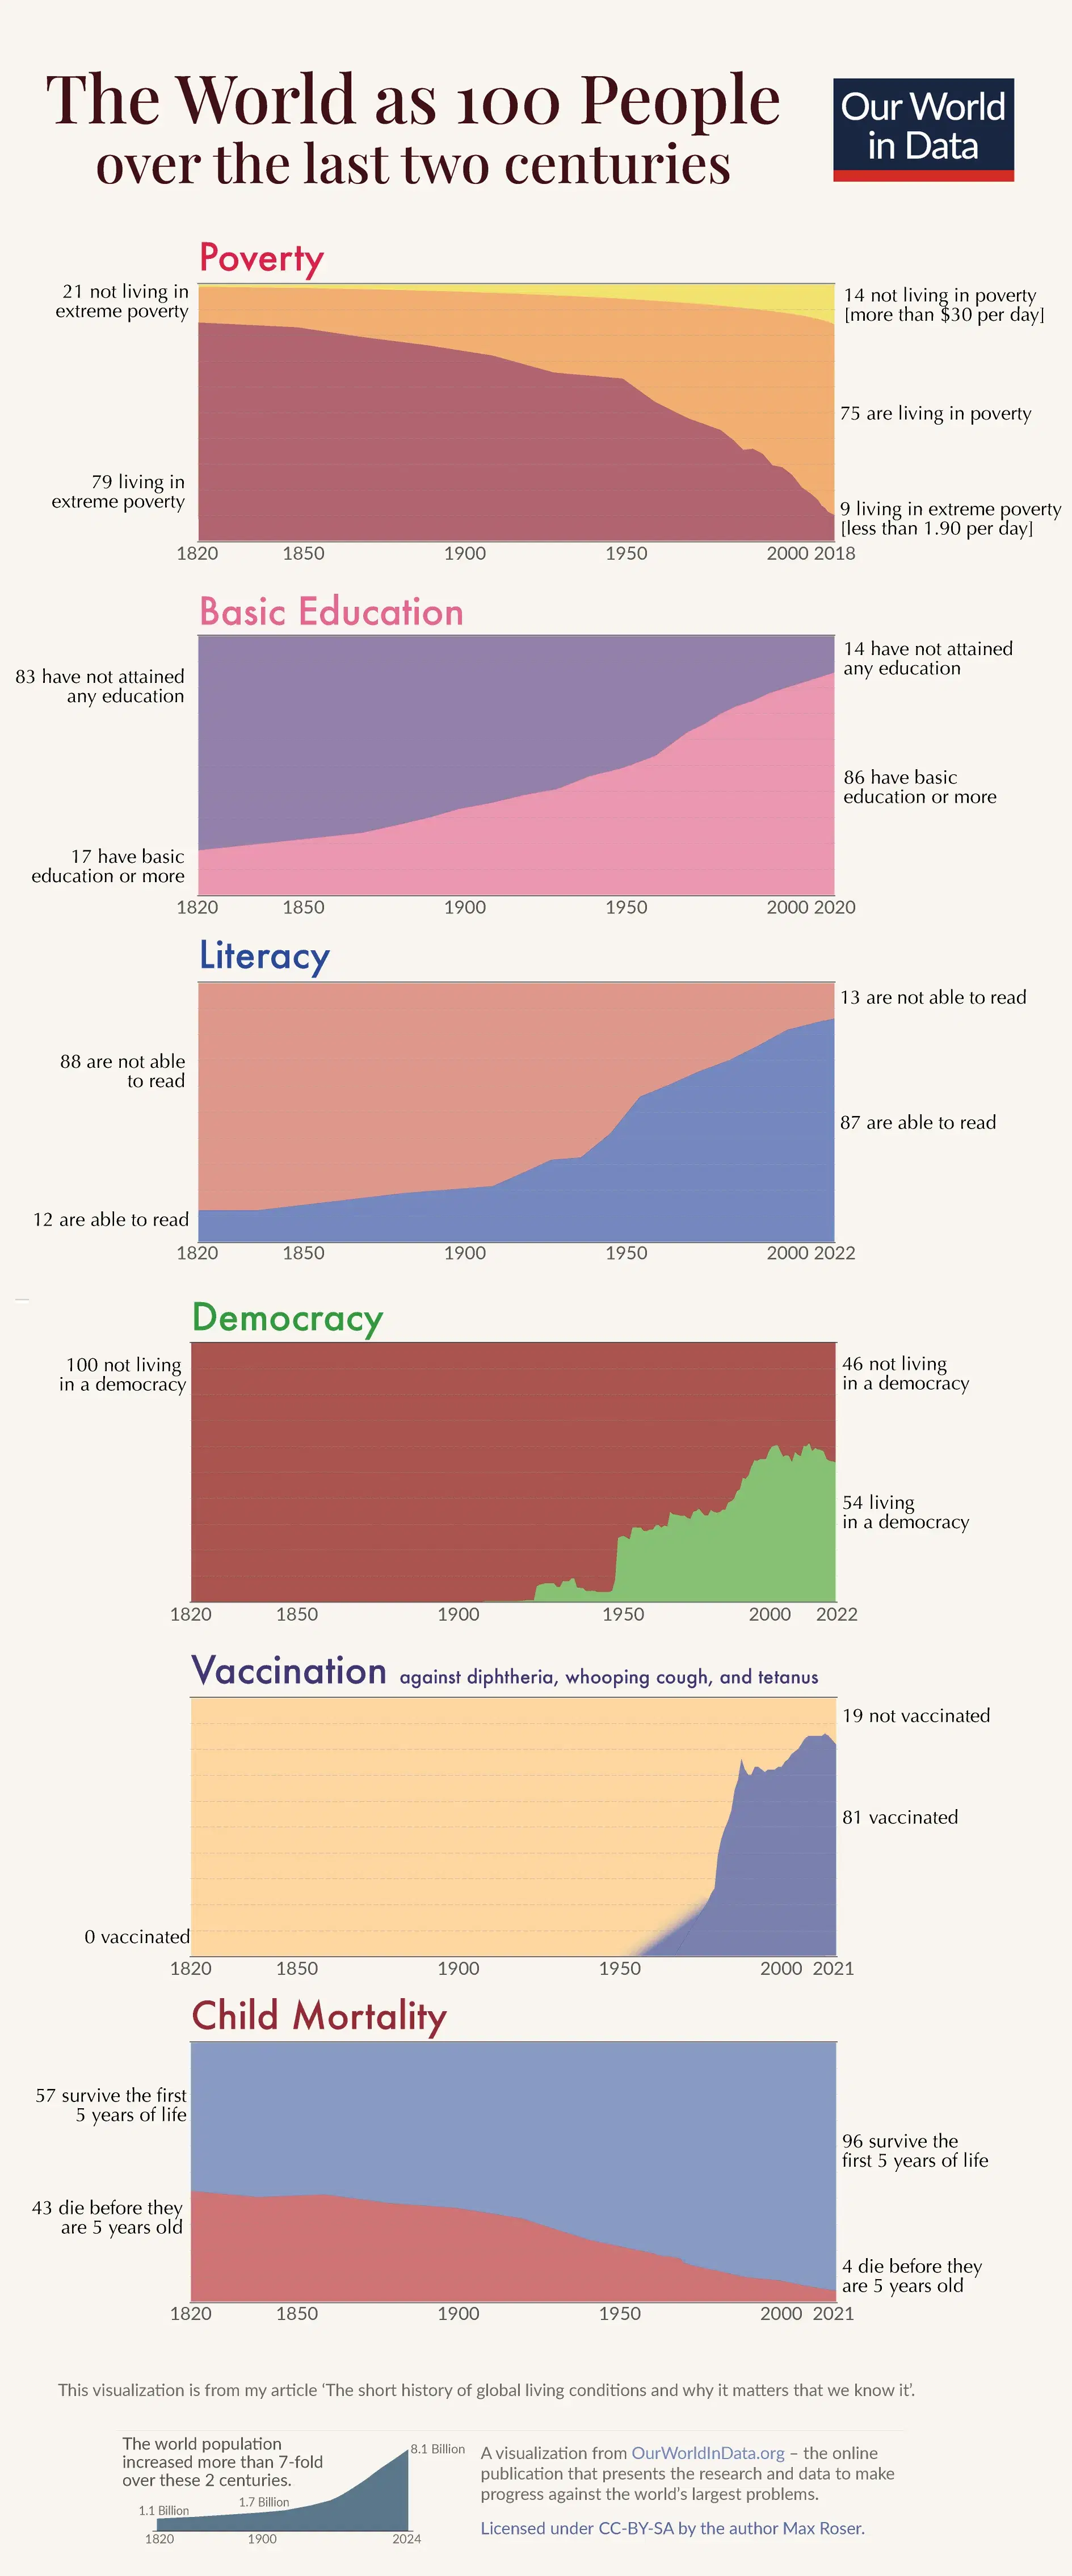 The World as 100 People Over the Last Two Centuries